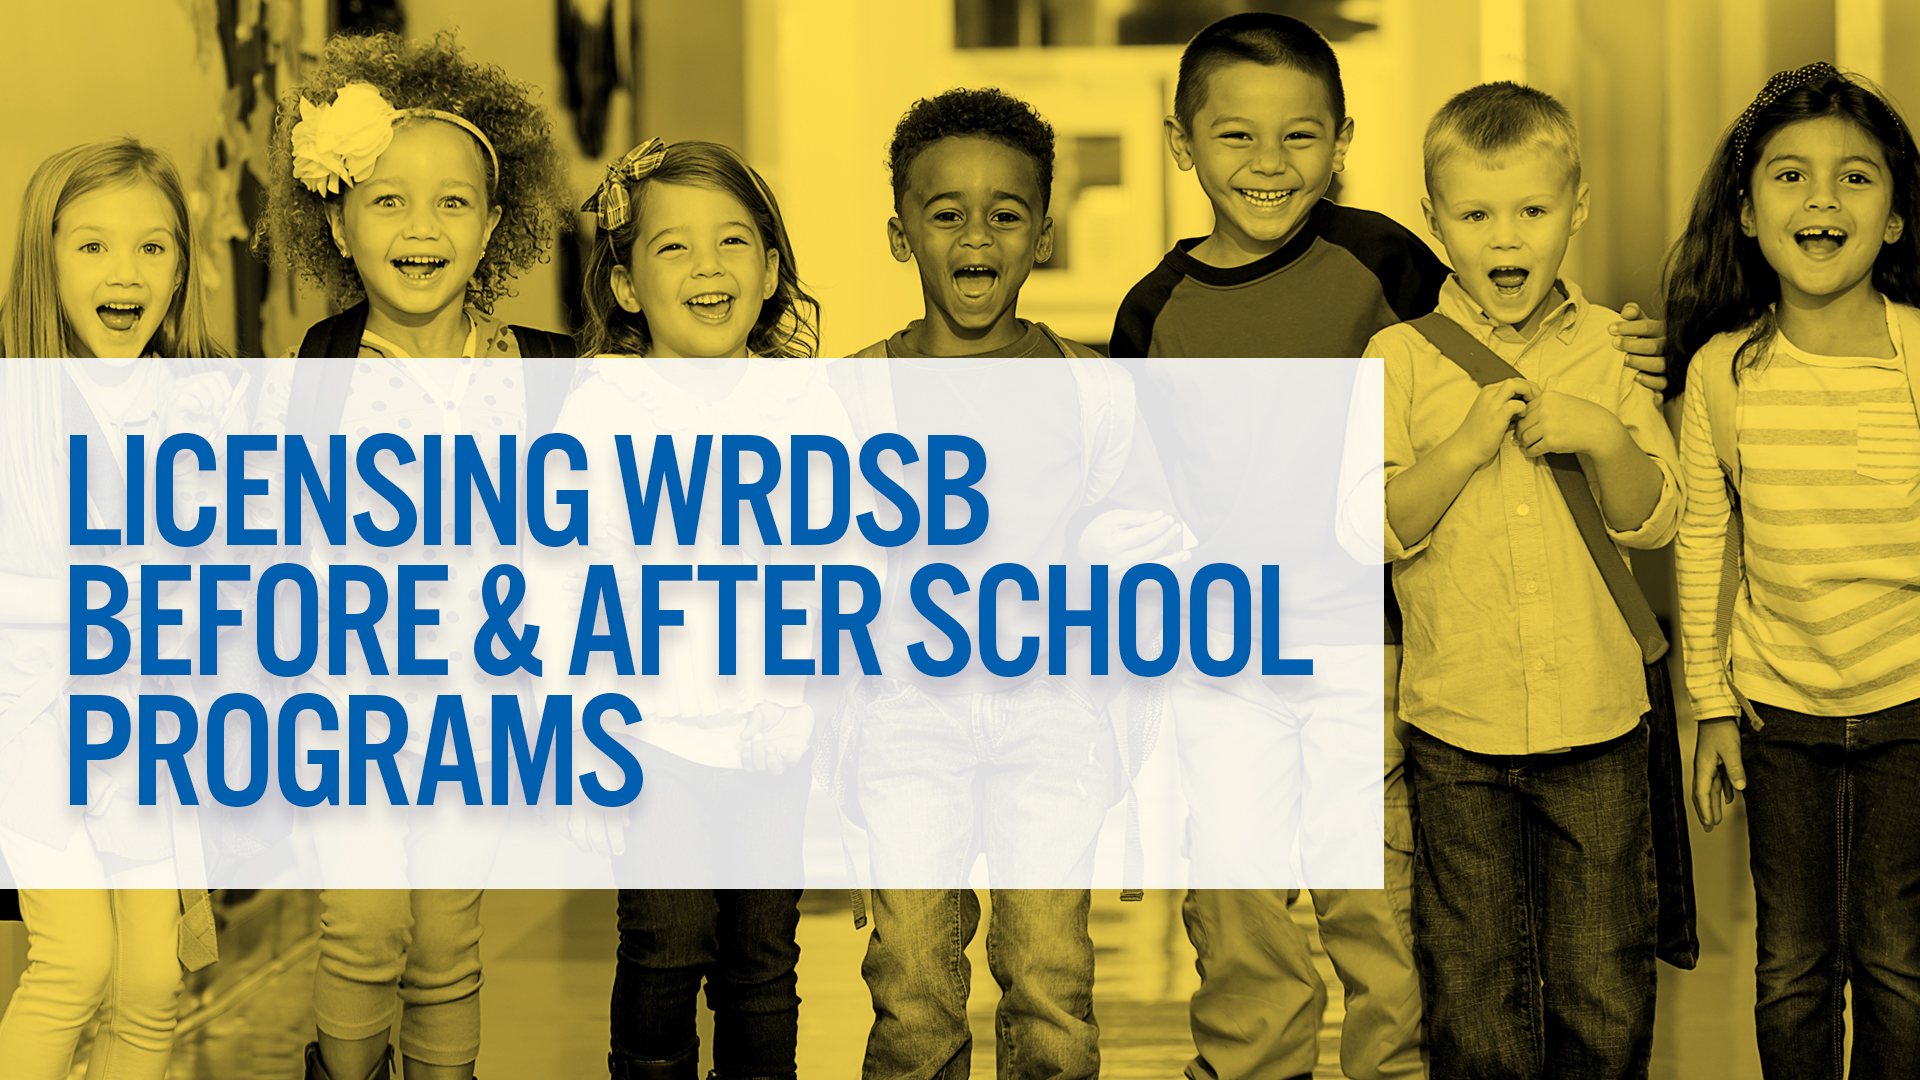 Licensing WRDSB Before & After School Programs